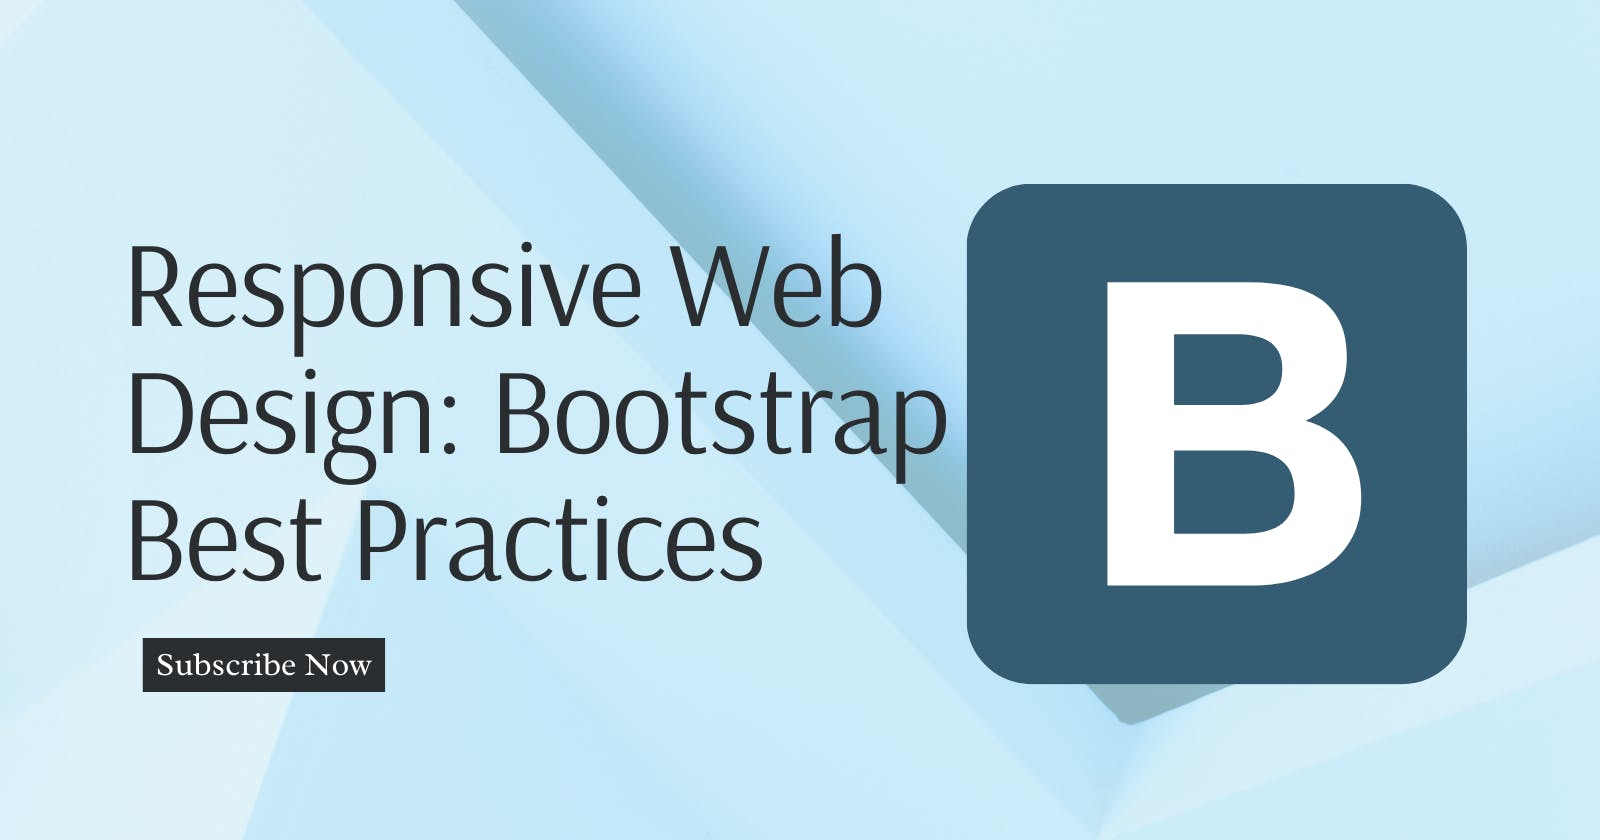 Responsive Web Design with Bootstrap: Best Practices